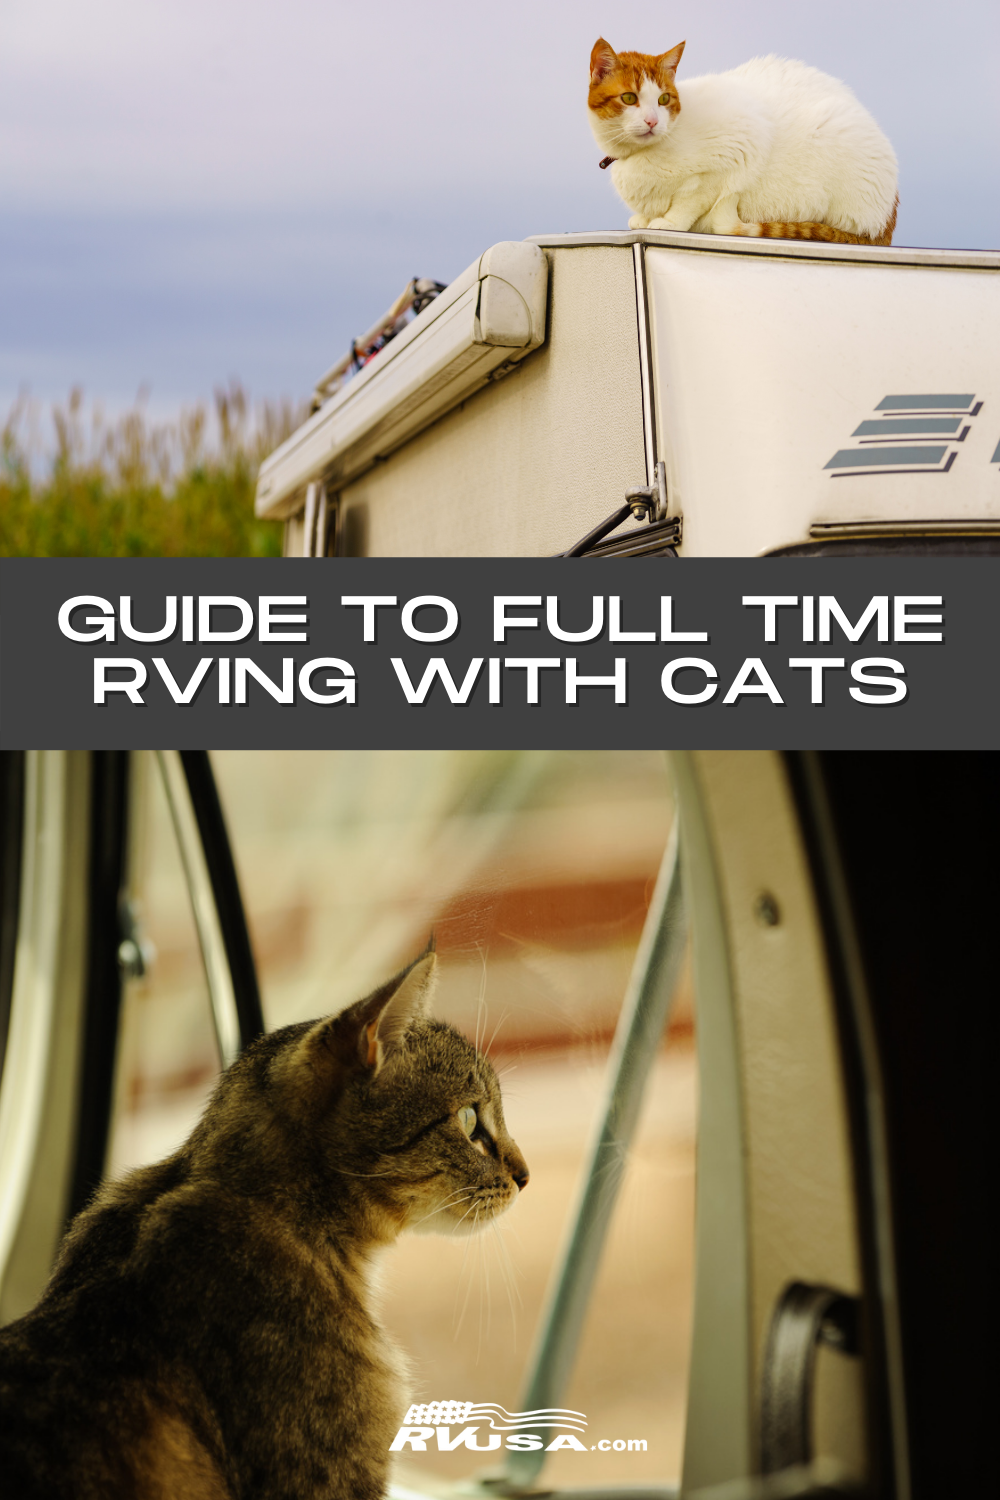 Two photos of cats with RVs. Text reads "Guide to full time RVing with cats"